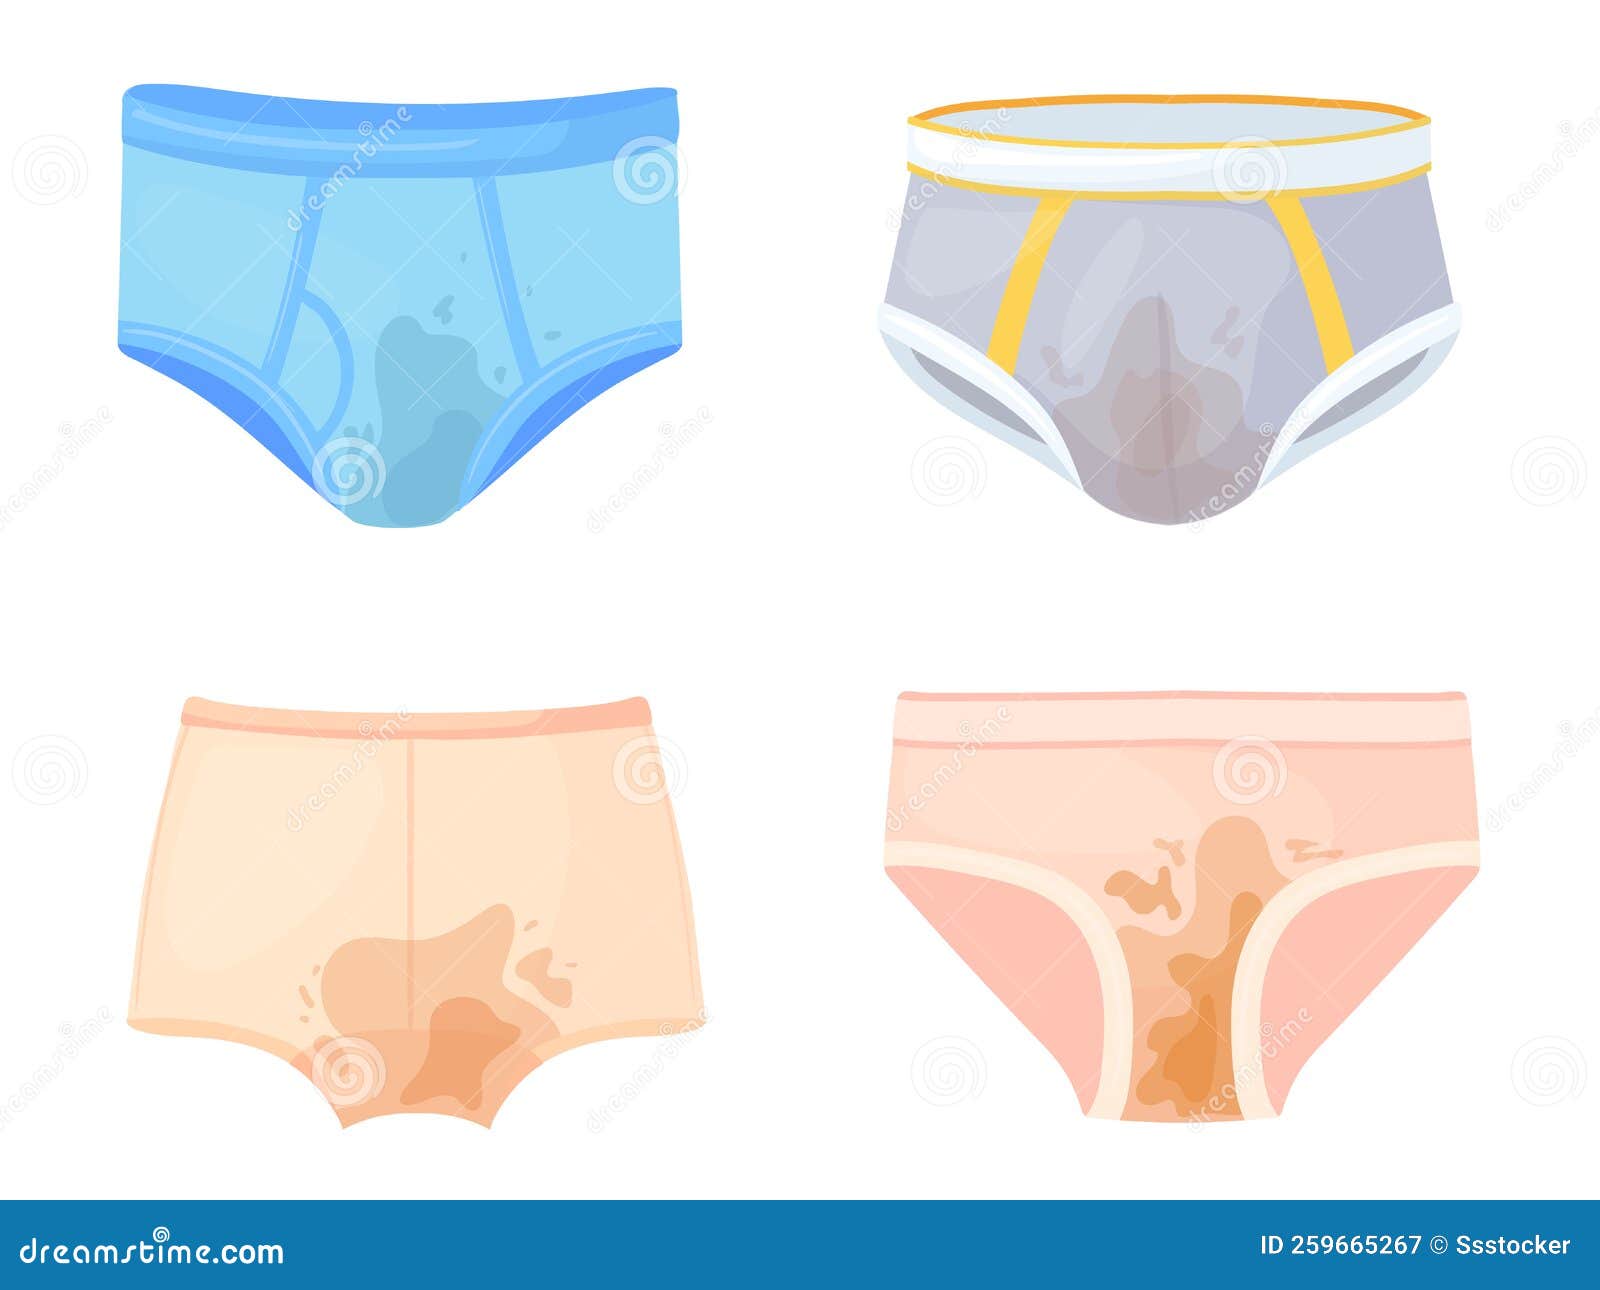 Dirty Underwear. Mens and Womens Underpants with Urinal Stains, Wet Panties  Dirt Hygiene Shorts Stinky Pants Mud Bikini Stock Vector - Illustration of  household, isolated: 259665267